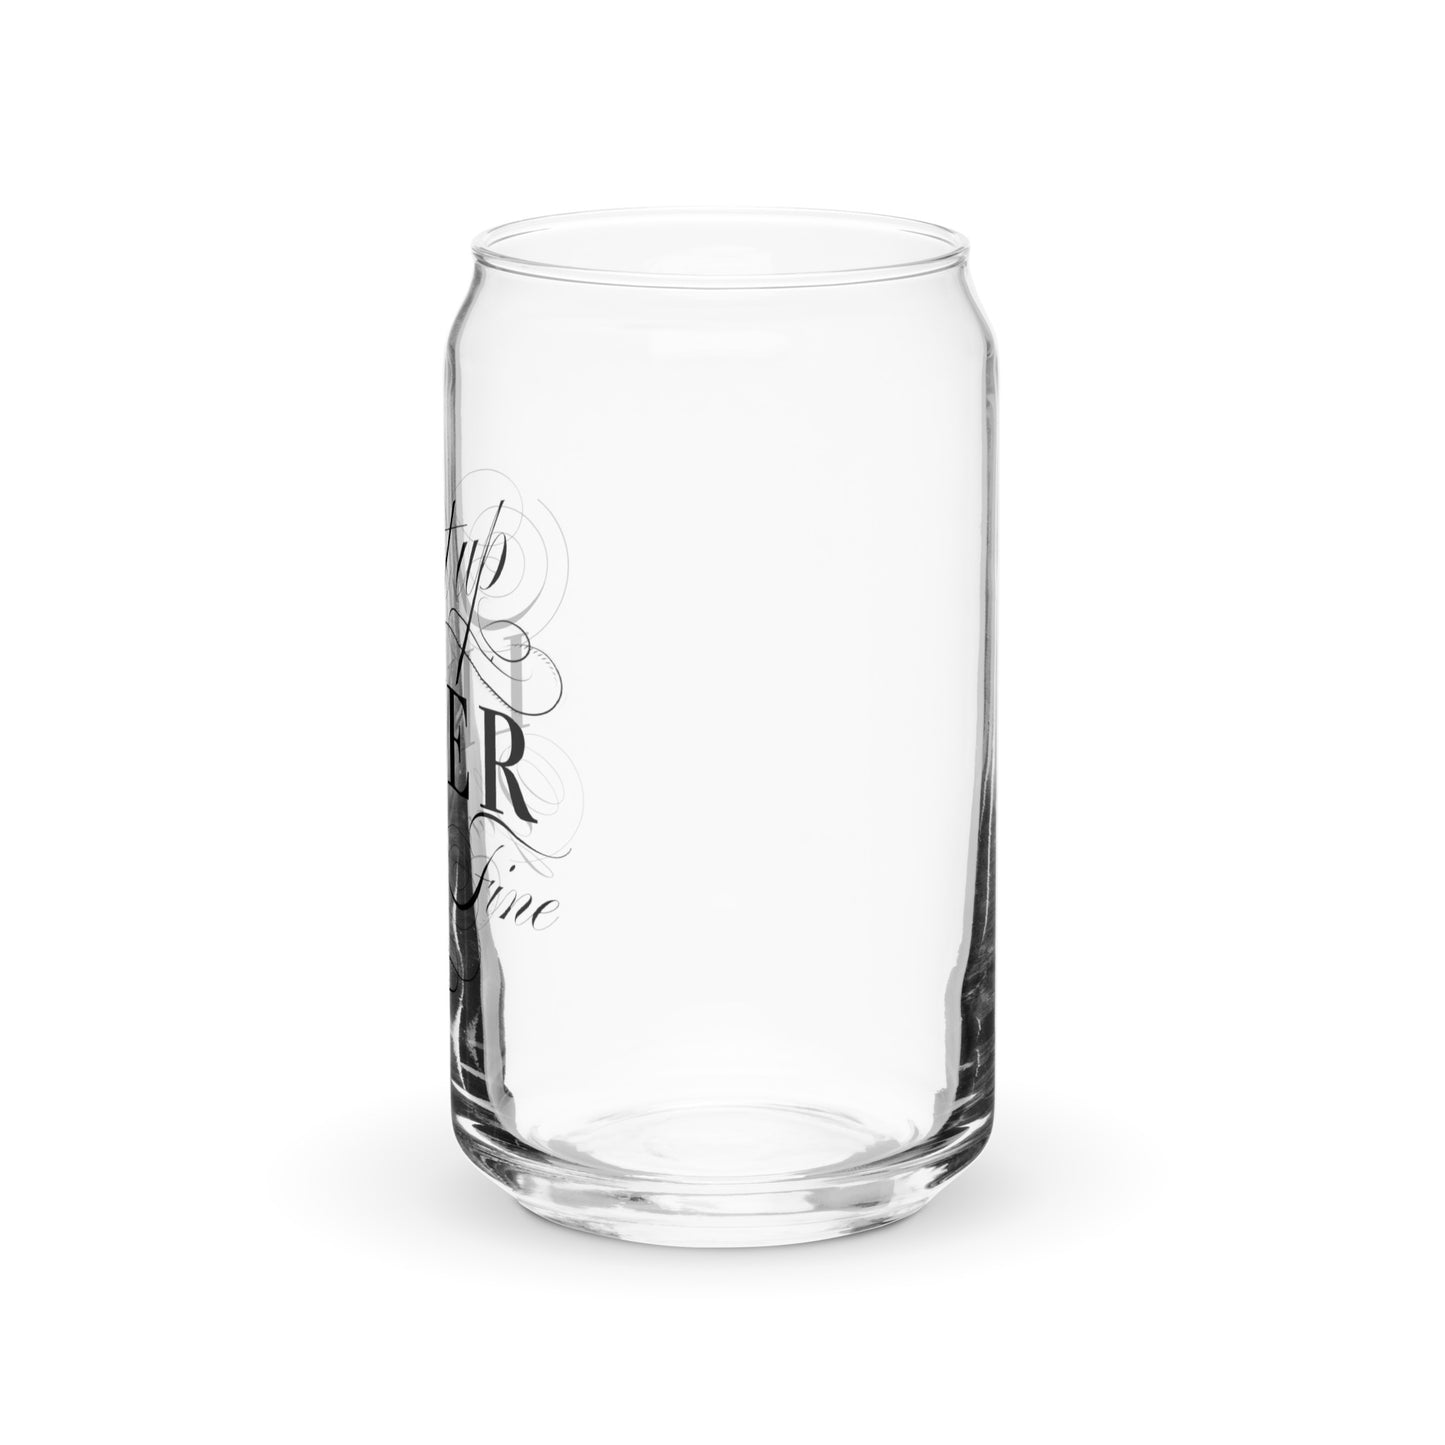 Shut Up Lived You're Fine Can-shaped glass